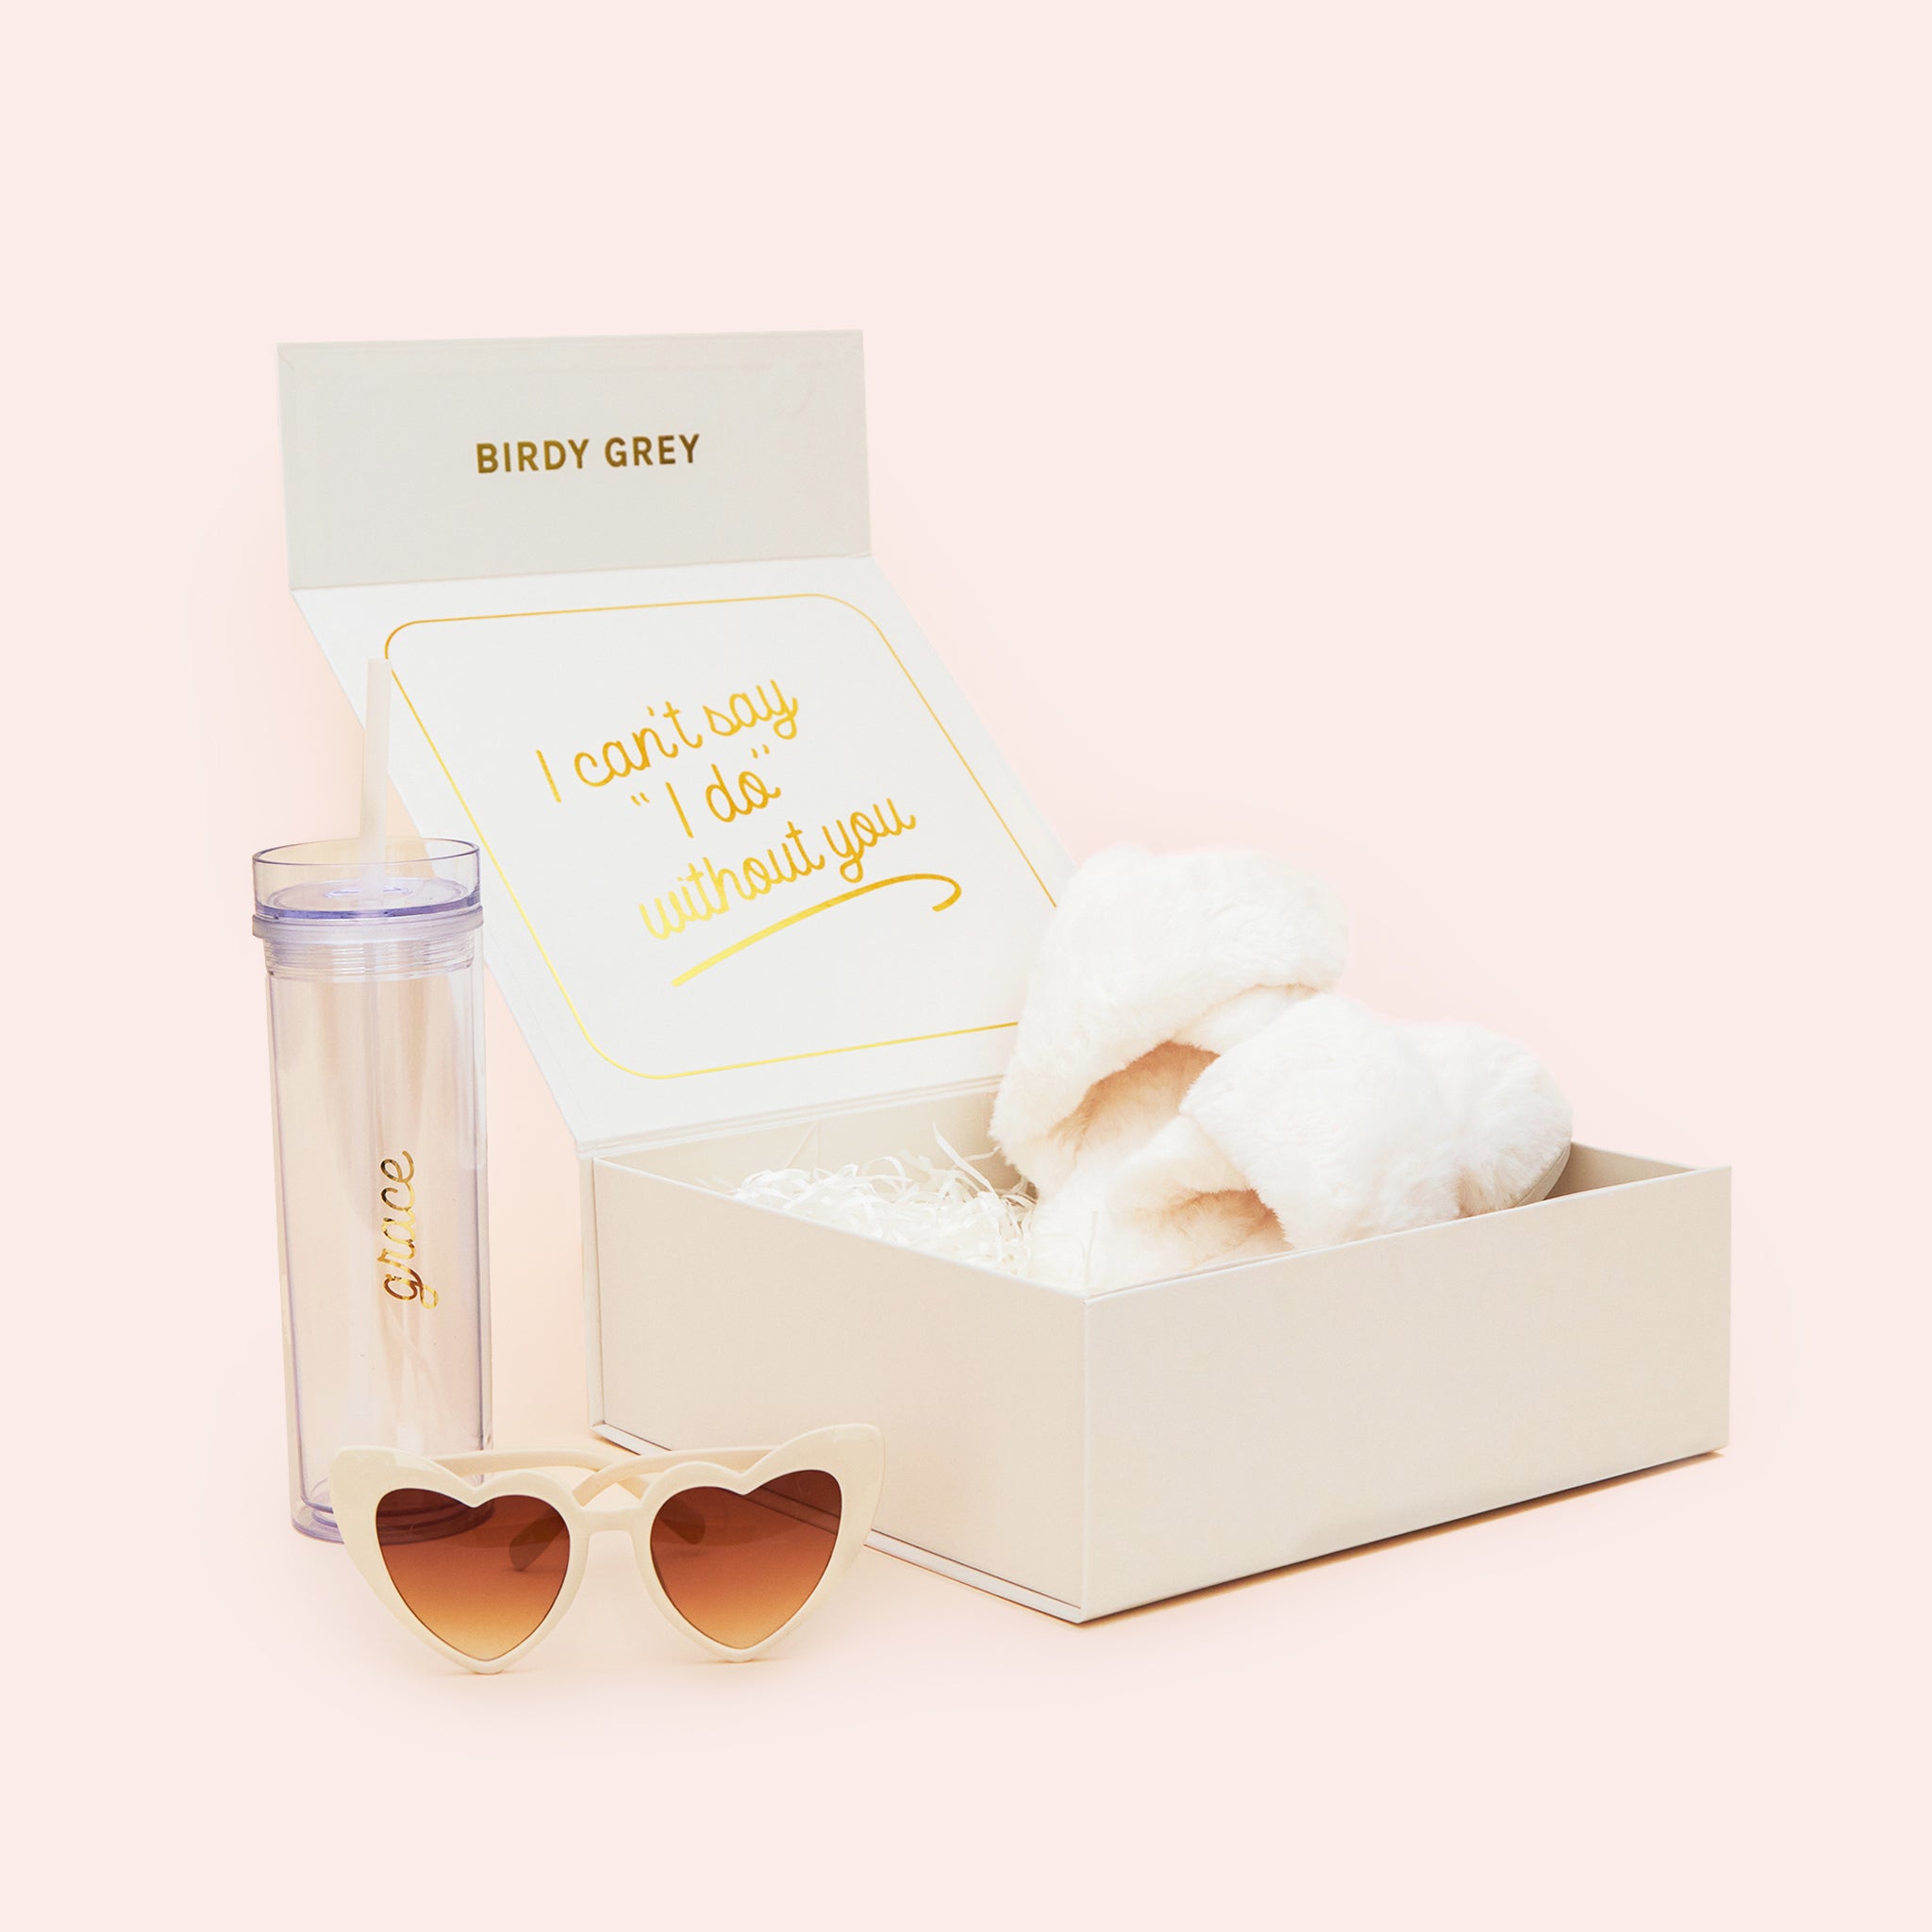 Personalized Proposal Box with tumblr, sunglasses and slippers in Champagne, front view